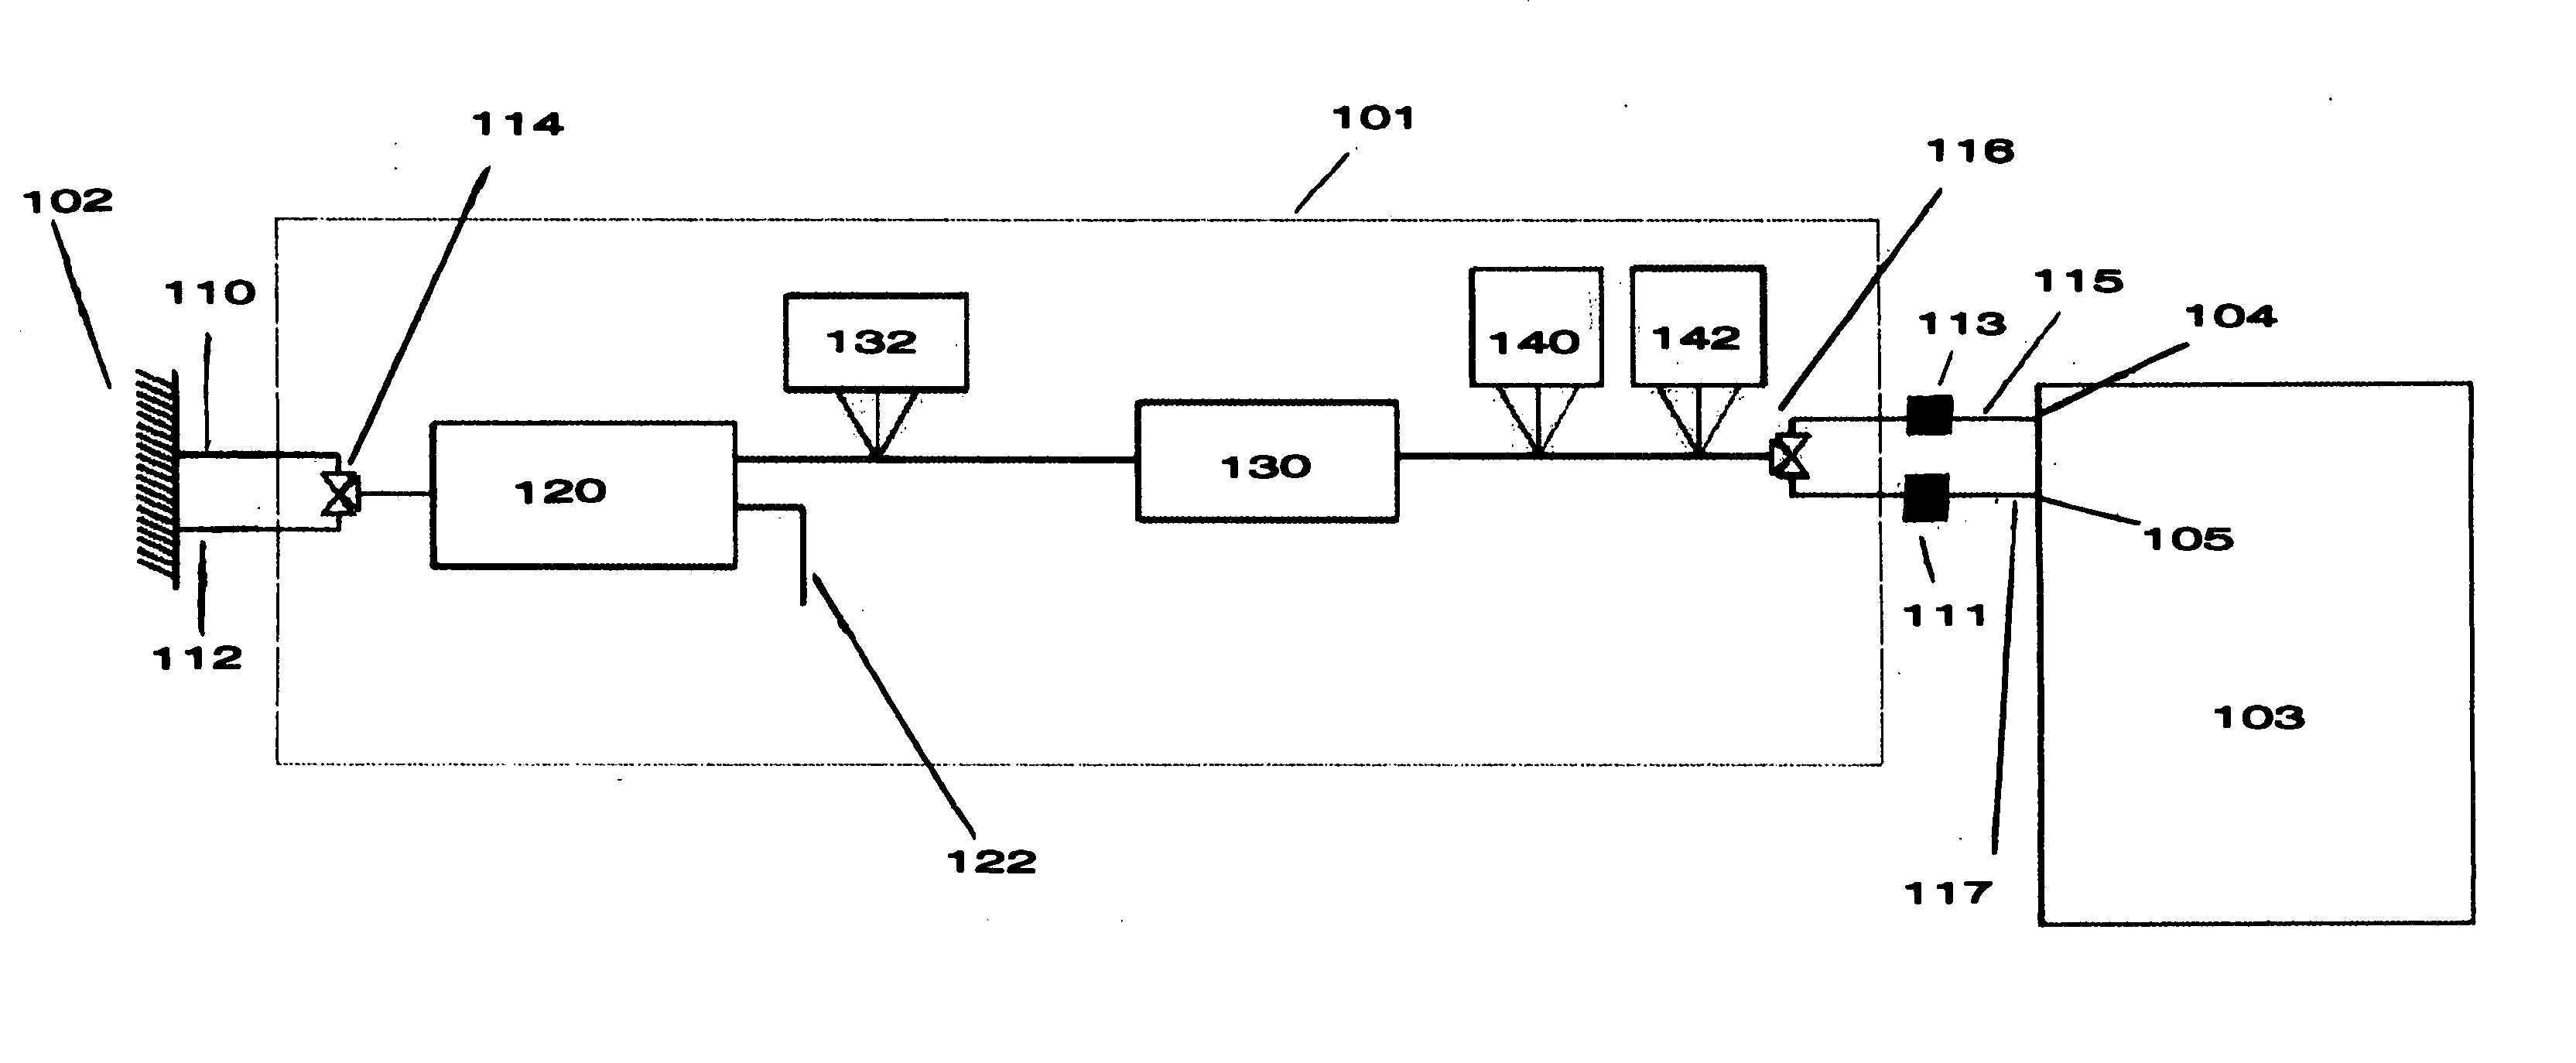 Device and system for improved cleaning in a washing machine